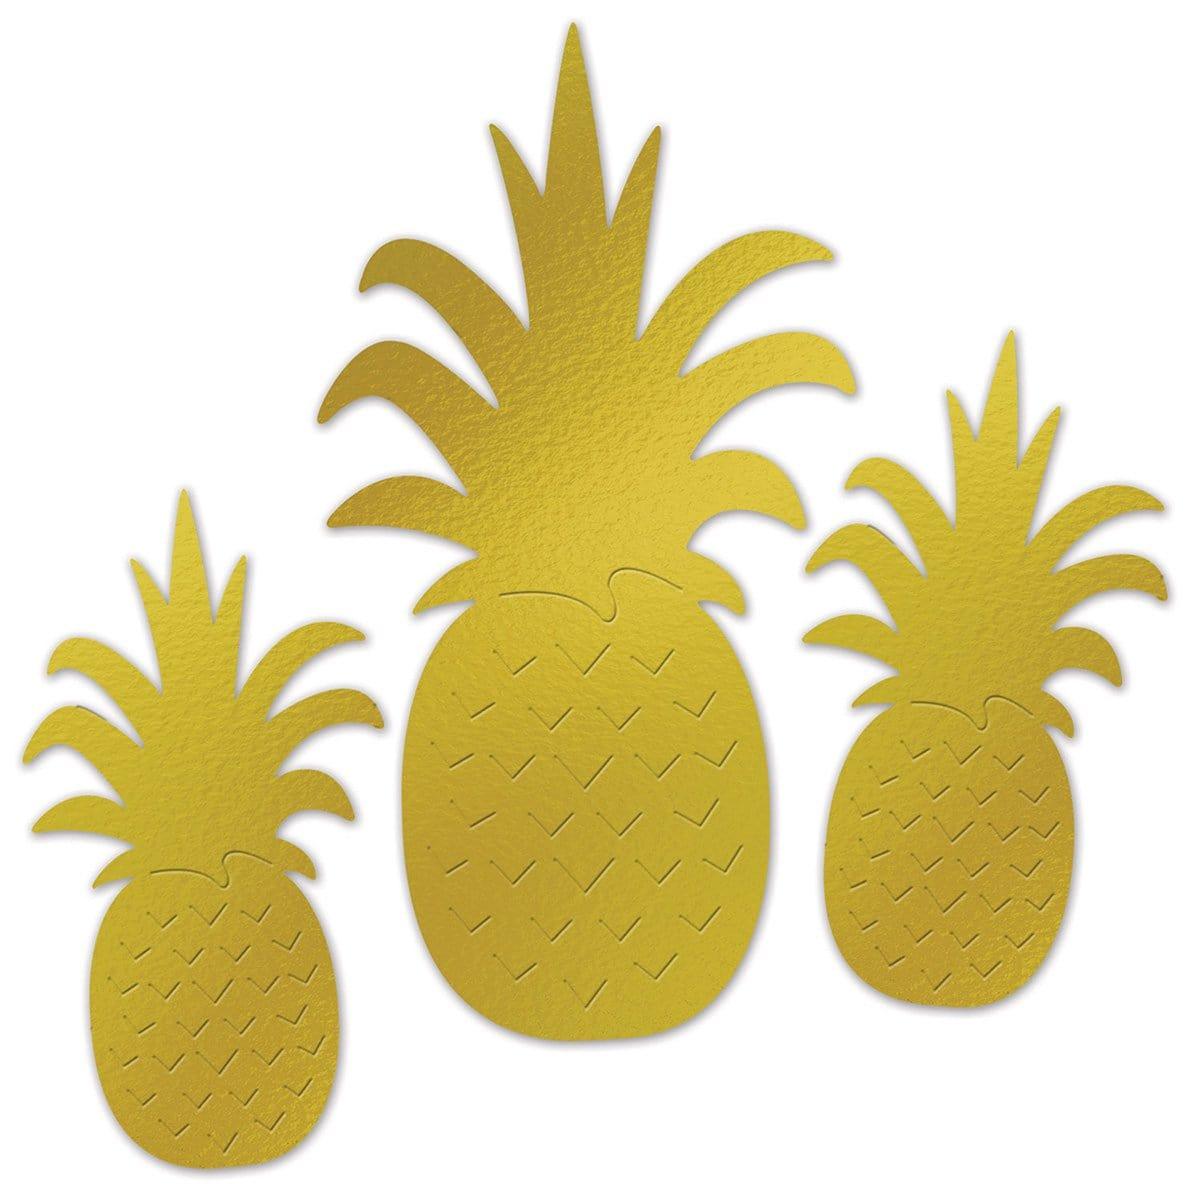 Buy Theme Party Gold Foil Pineapple Cutouts, 3 per Package sold at Party Expert